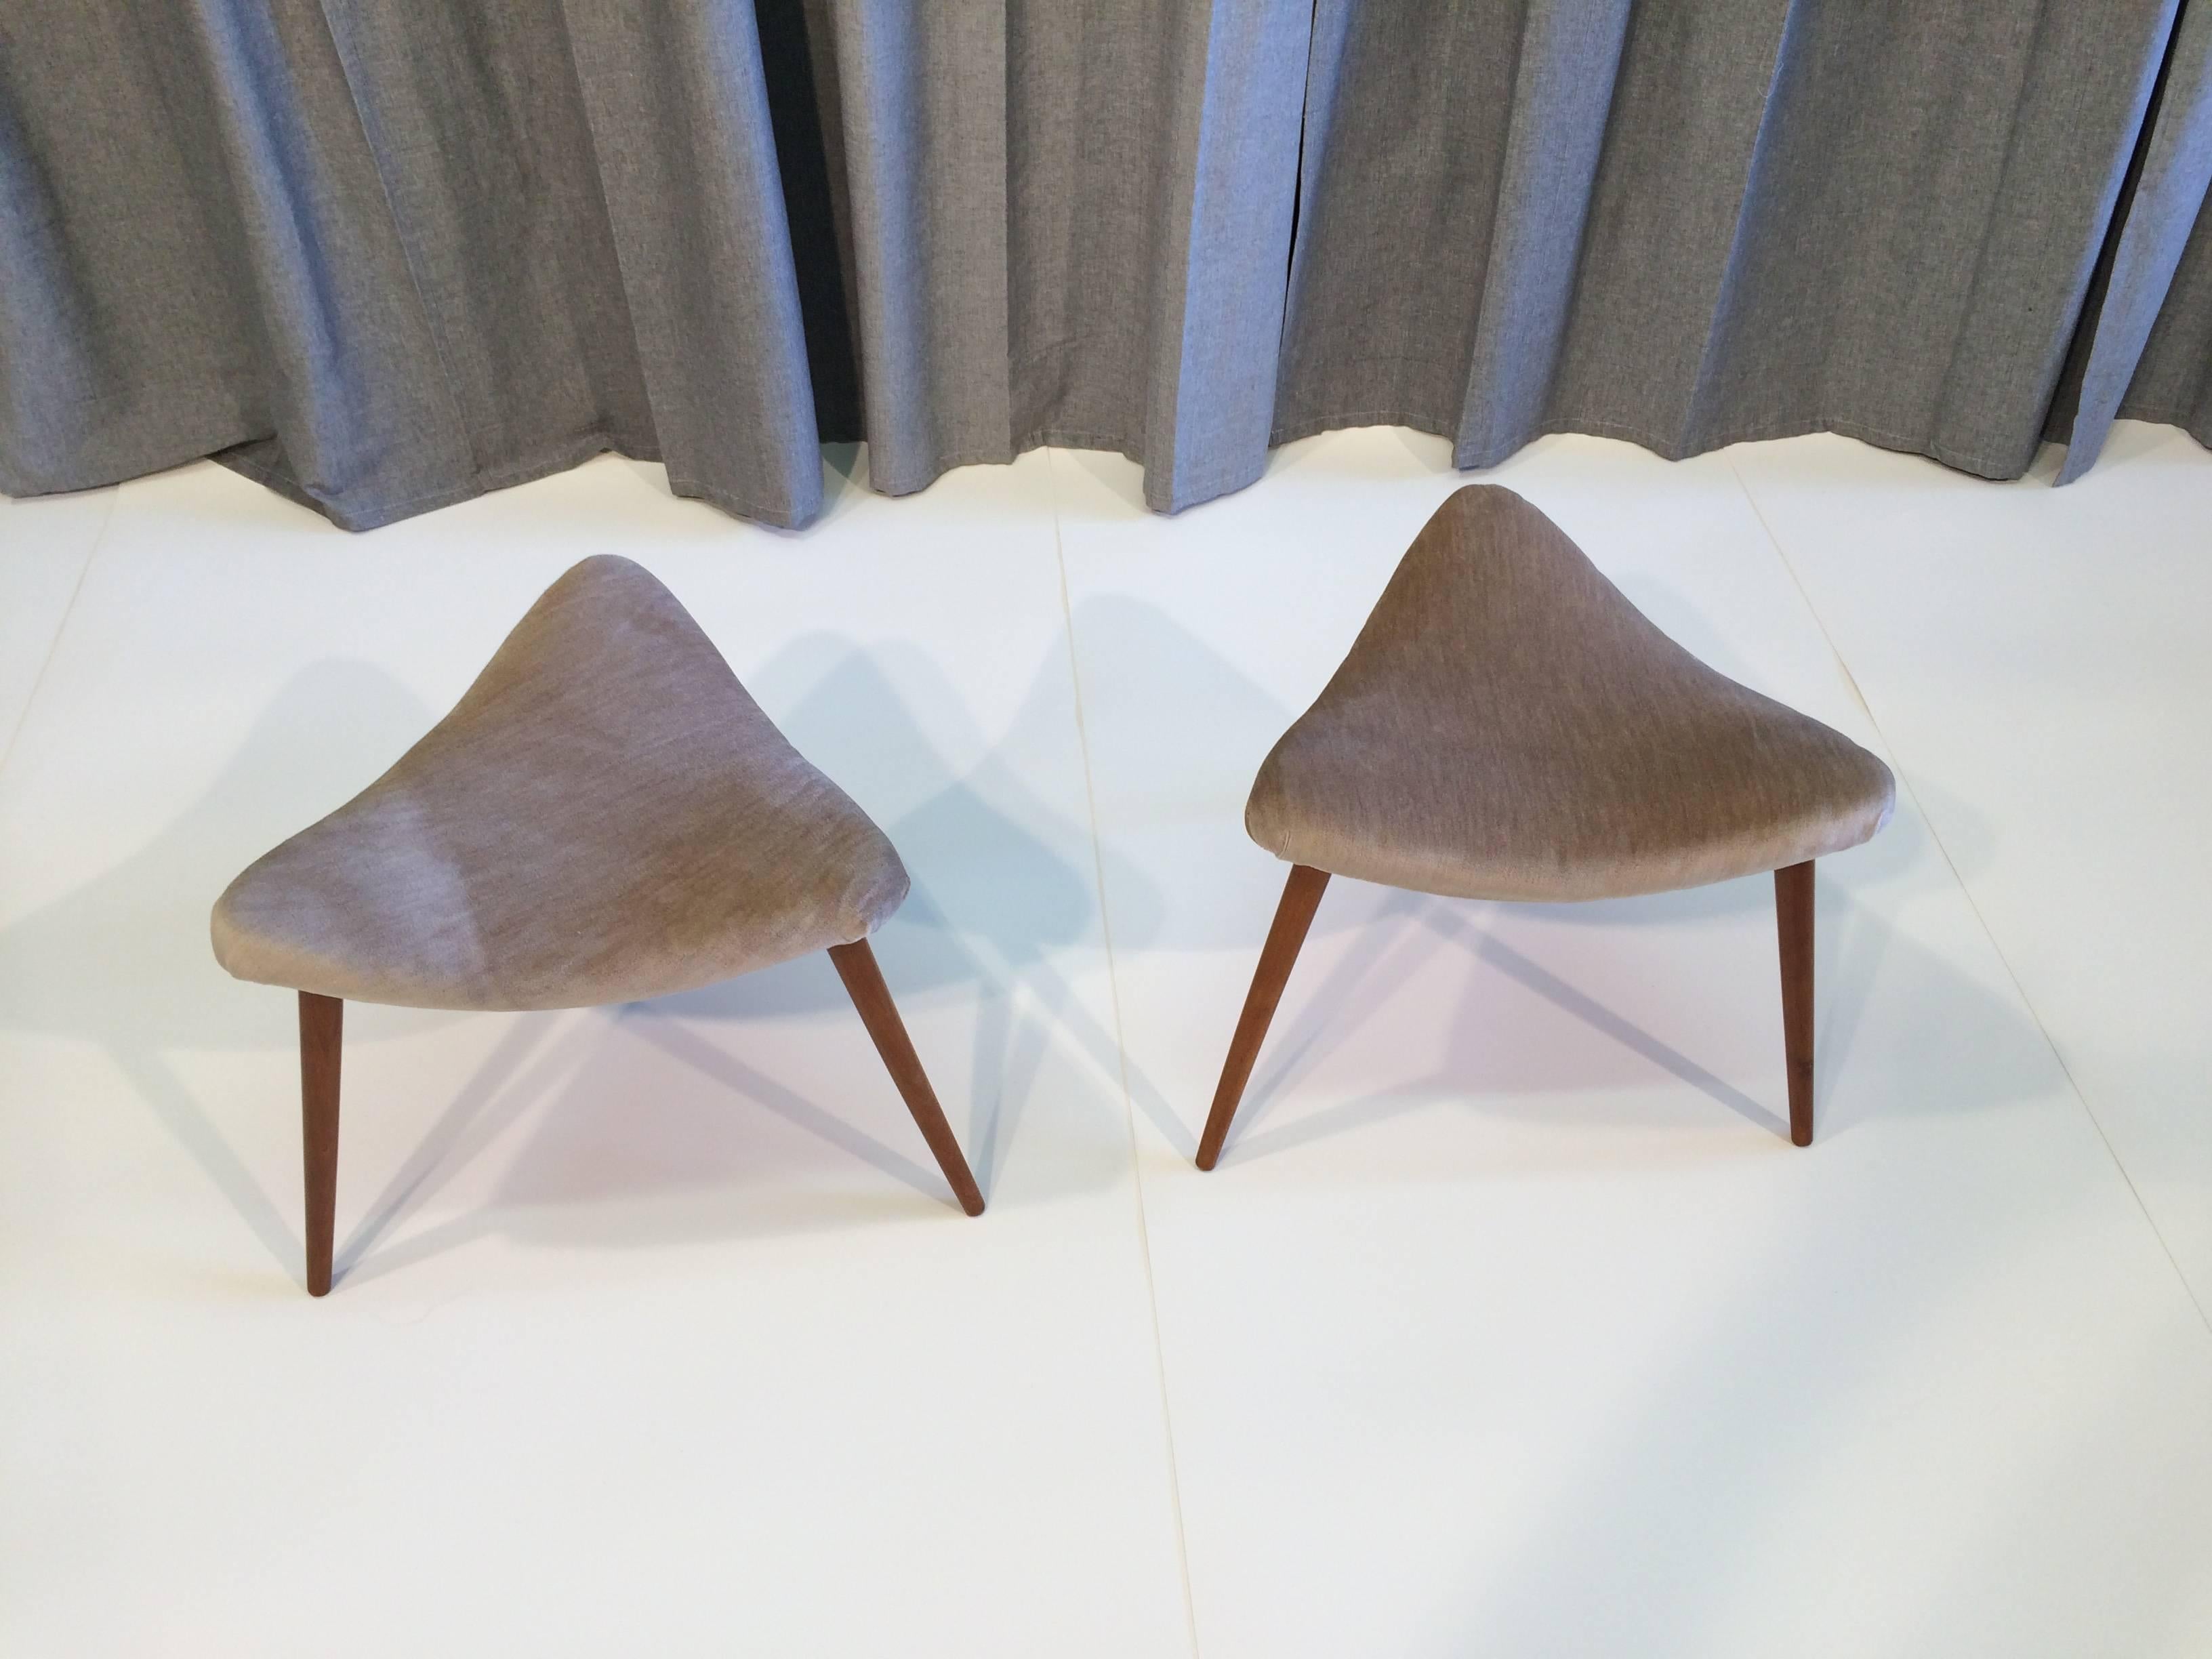 Beautiful pair of triangular shaped Danish stools. Each stool stands on three legs. Great design and quality.